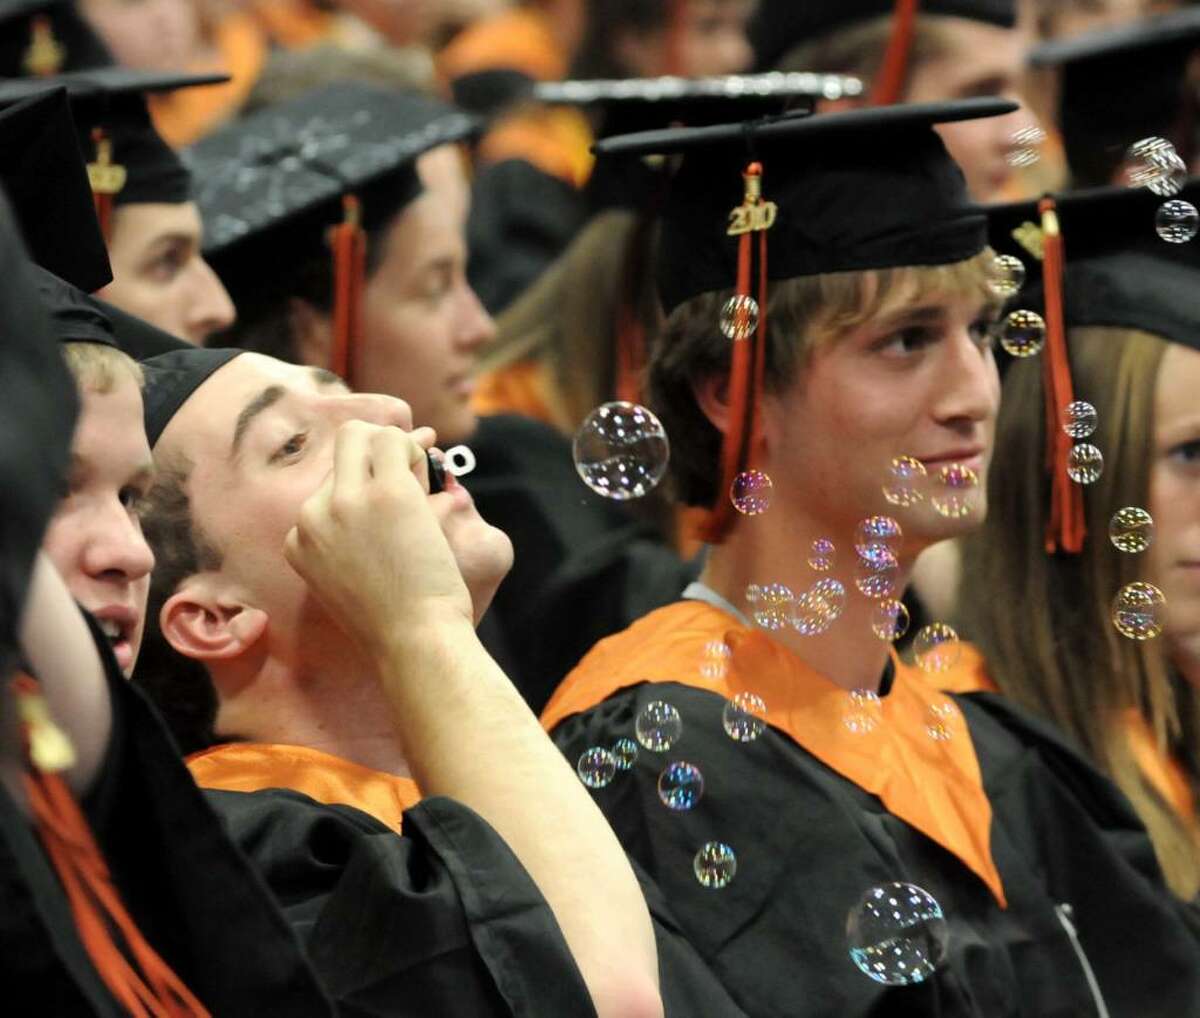 Ridgefield High School graduates blow bubbles while they wait for their turn to get their diplomas at the Western Connecticut State University O'Neill Center on Friday June 25, 2010 during their commencement ceremony. From left, Steven Montanari, John Morrison and Duncan Morrissey.